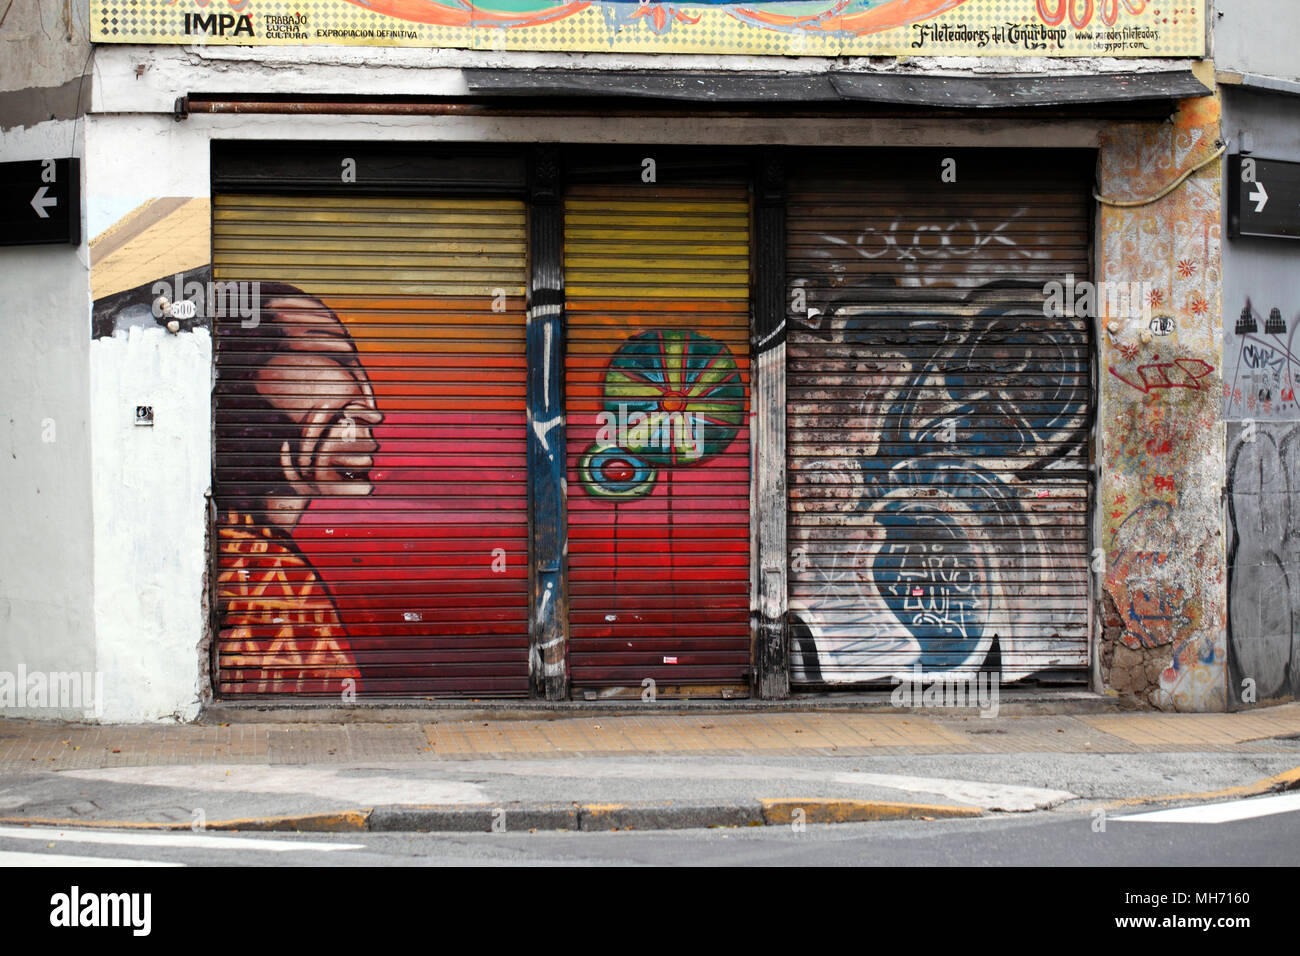 streetart on shutters in St Telmo, Buenos Aires, Argentina. Stock Photo